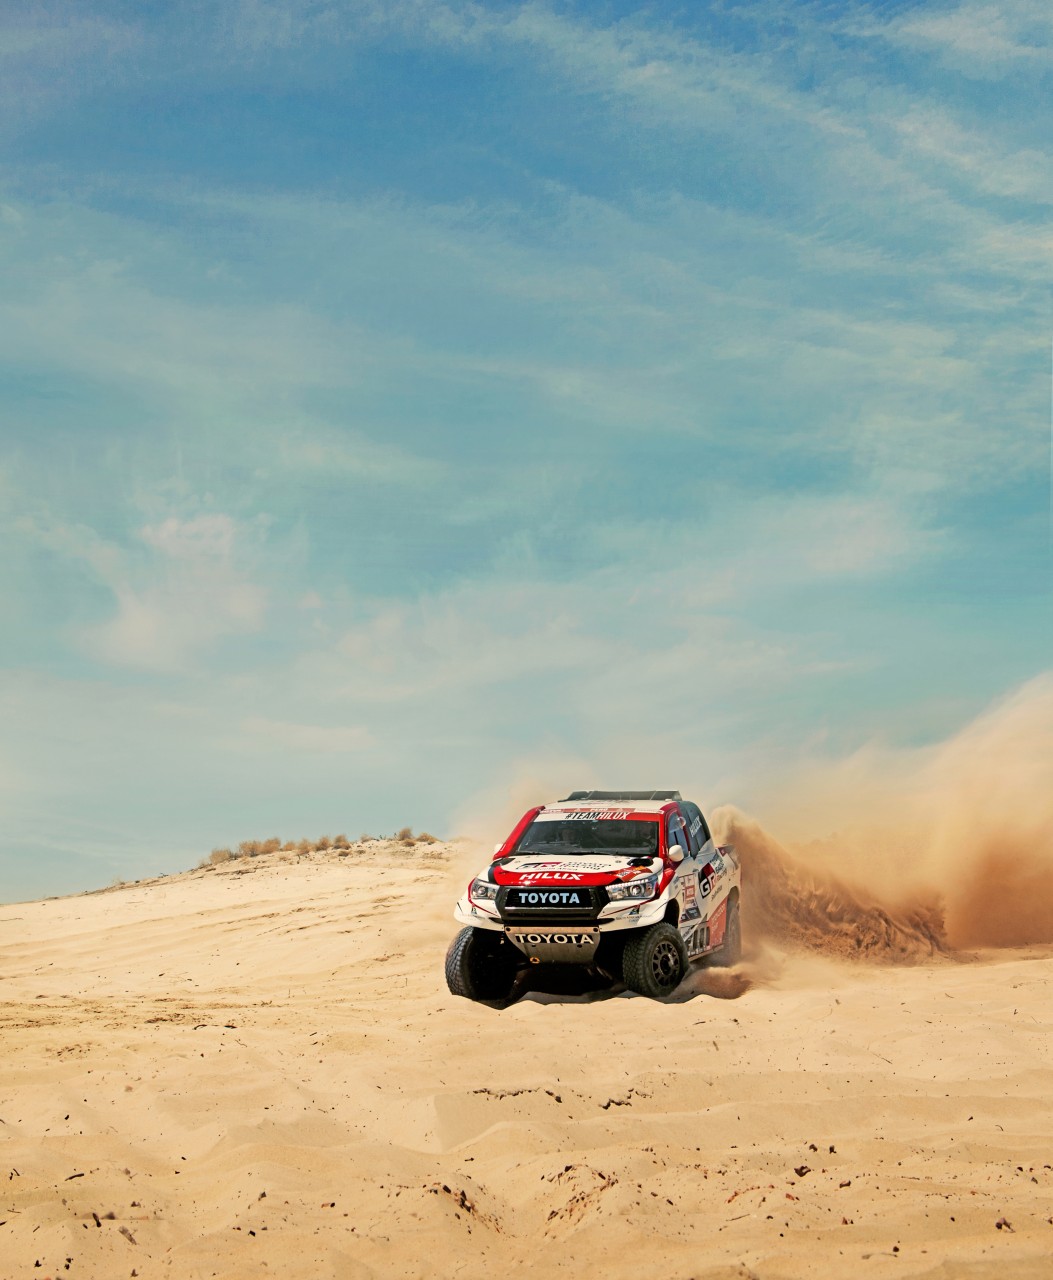 Rally car driving on a sandy road